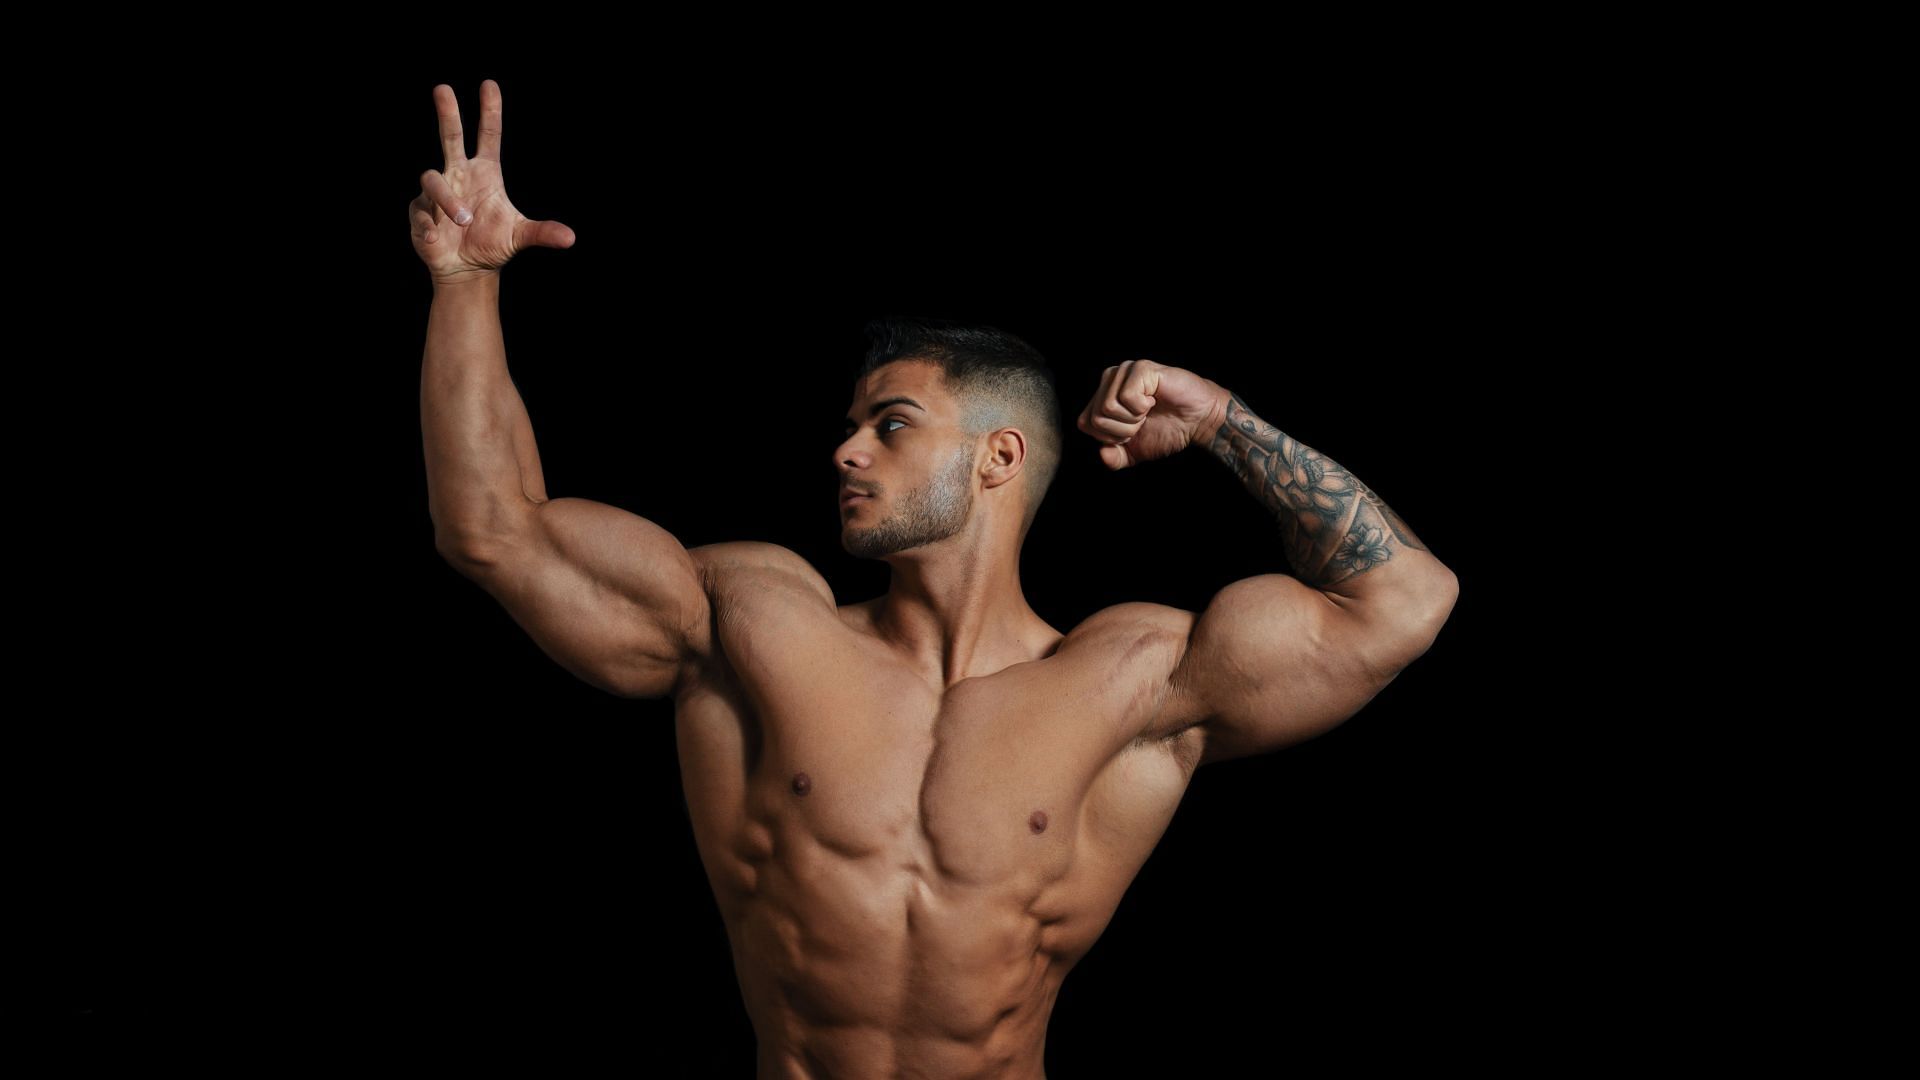 Bodybuilders, here are some tips for your next competition! (Image via unsplash/Norbert Buduczki)